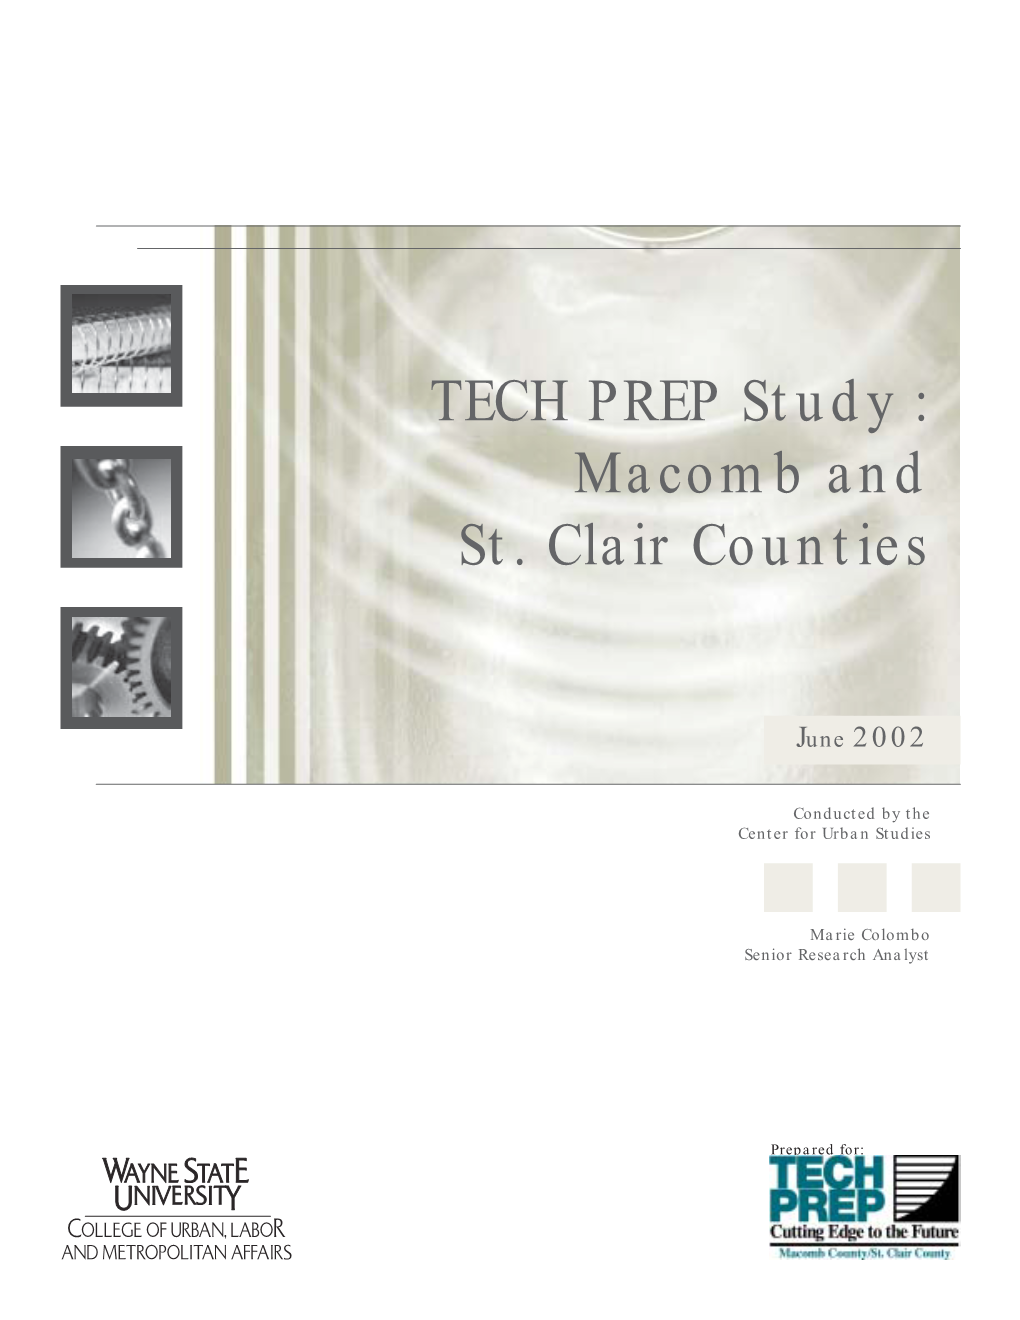 TECH PREP Study : Macomb and St. Clair Counties